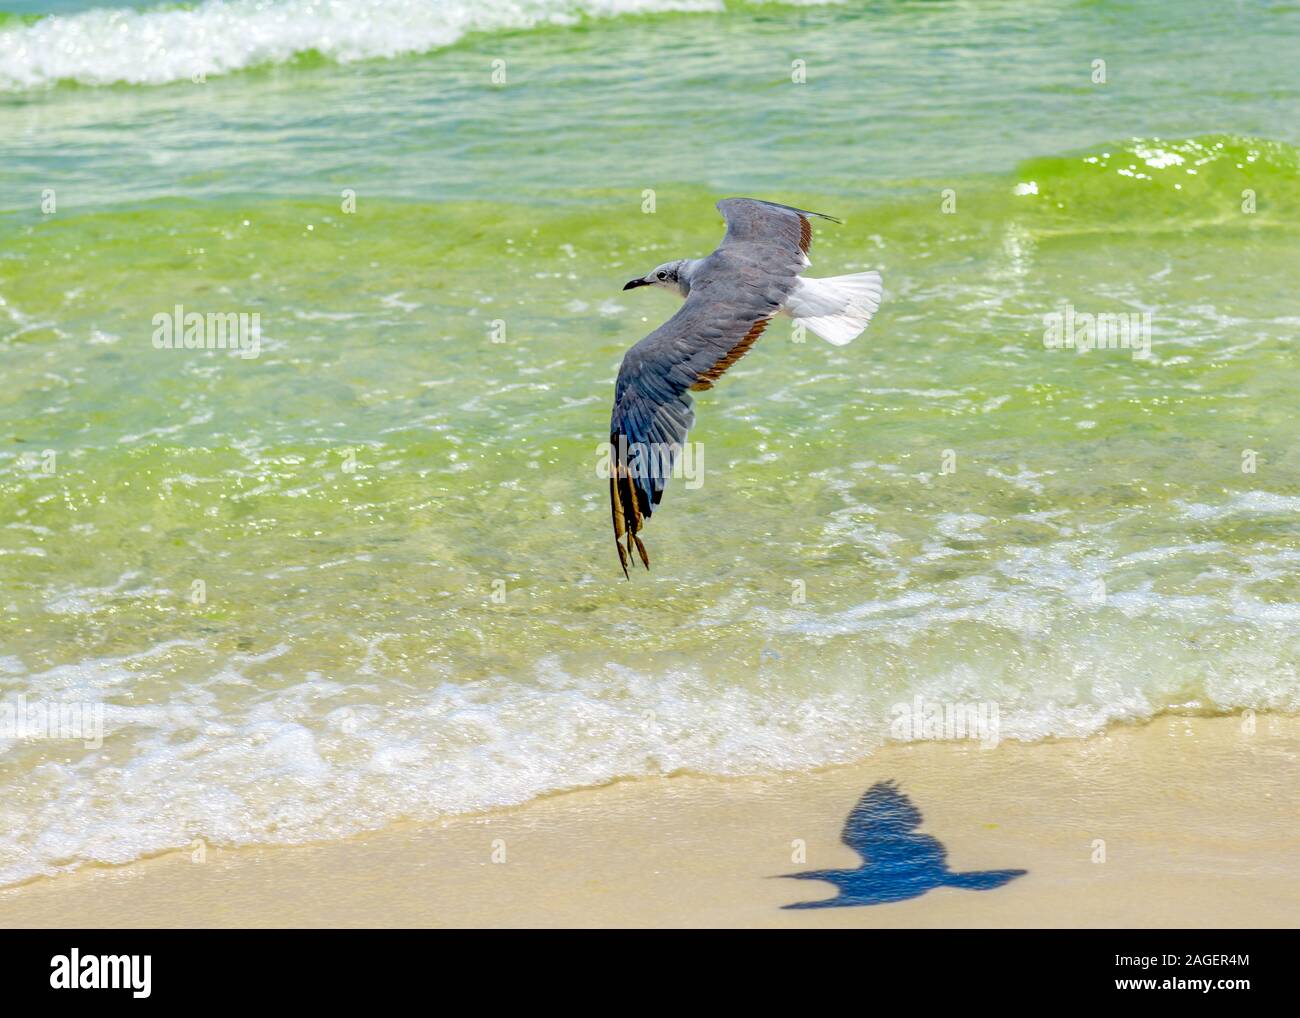 Laughing Gull (Leucophaeus atricilla) Flying over beach with waves and emerald water in background Stock Photo